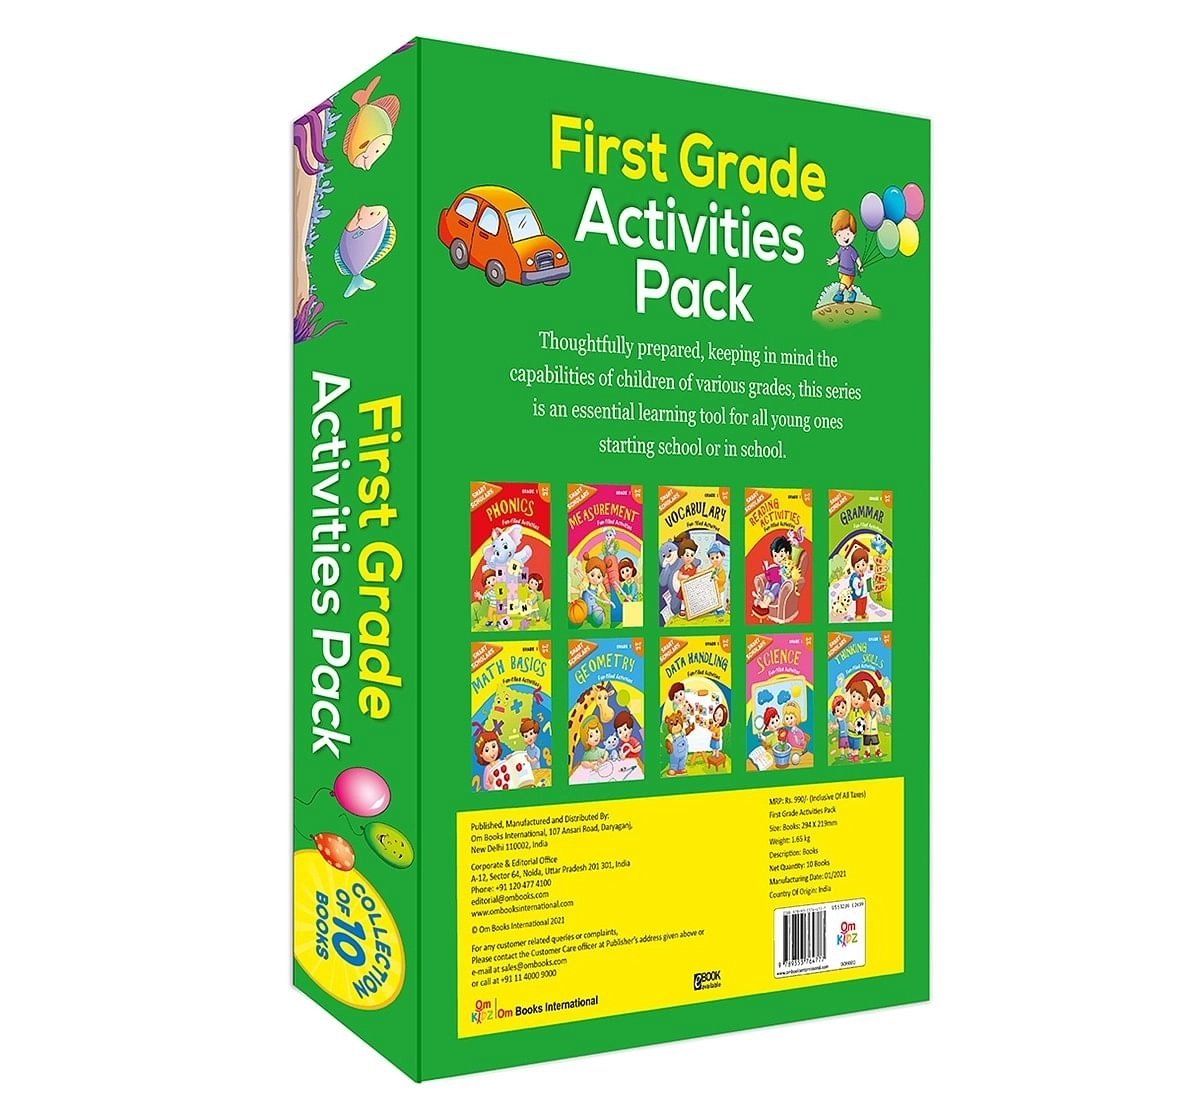 First Grade Activities Pack Smart Scholars, 320 Pages Book By Om Books Editorial Team, Paperback (Collection Of 10 Books)